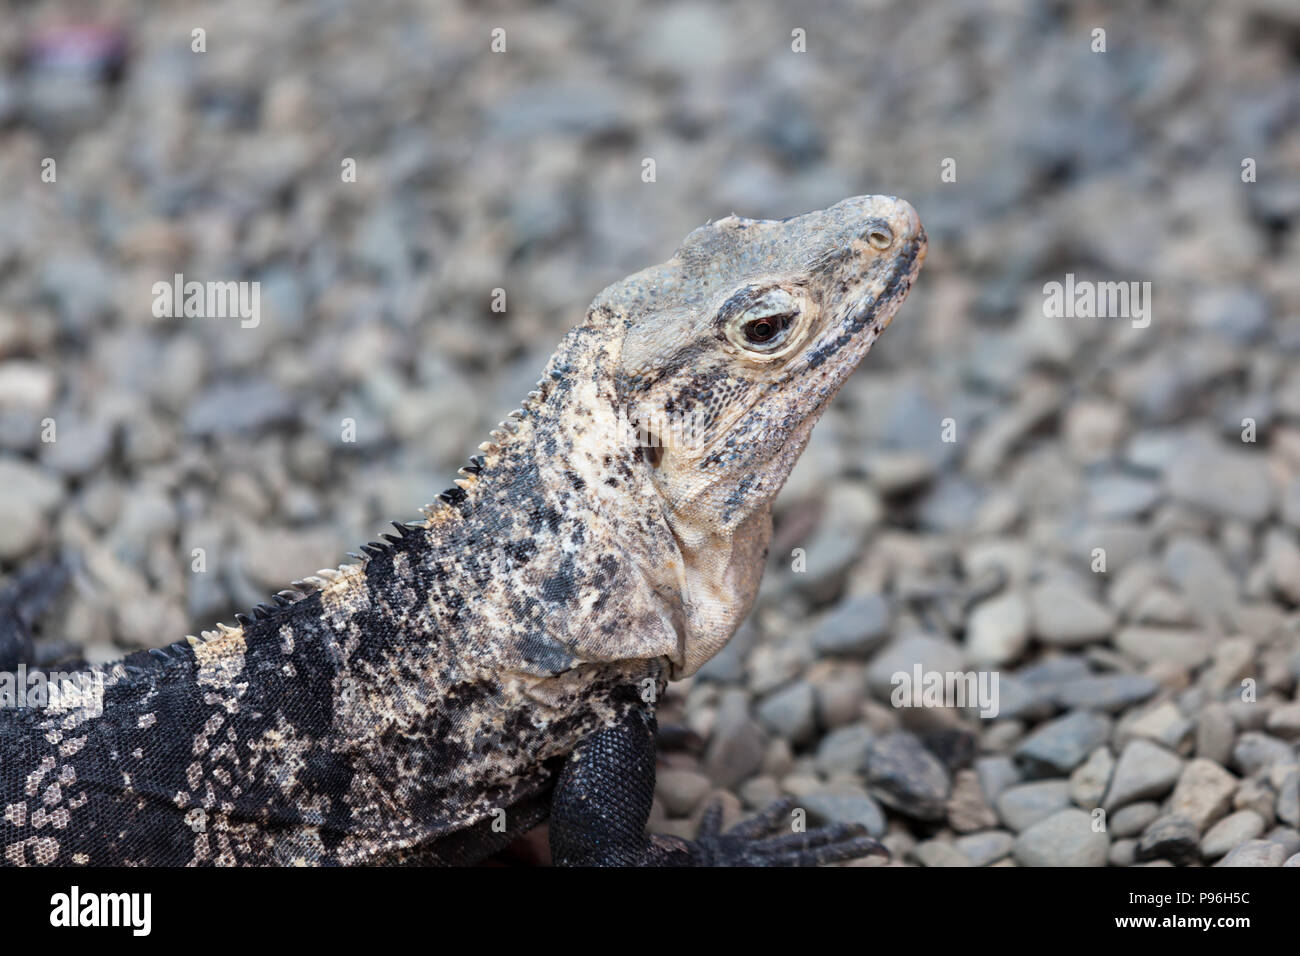 A close up of a beautiful tan and black iguana camouflaged among rocks on the ground in Costa Rica. Stock Photo